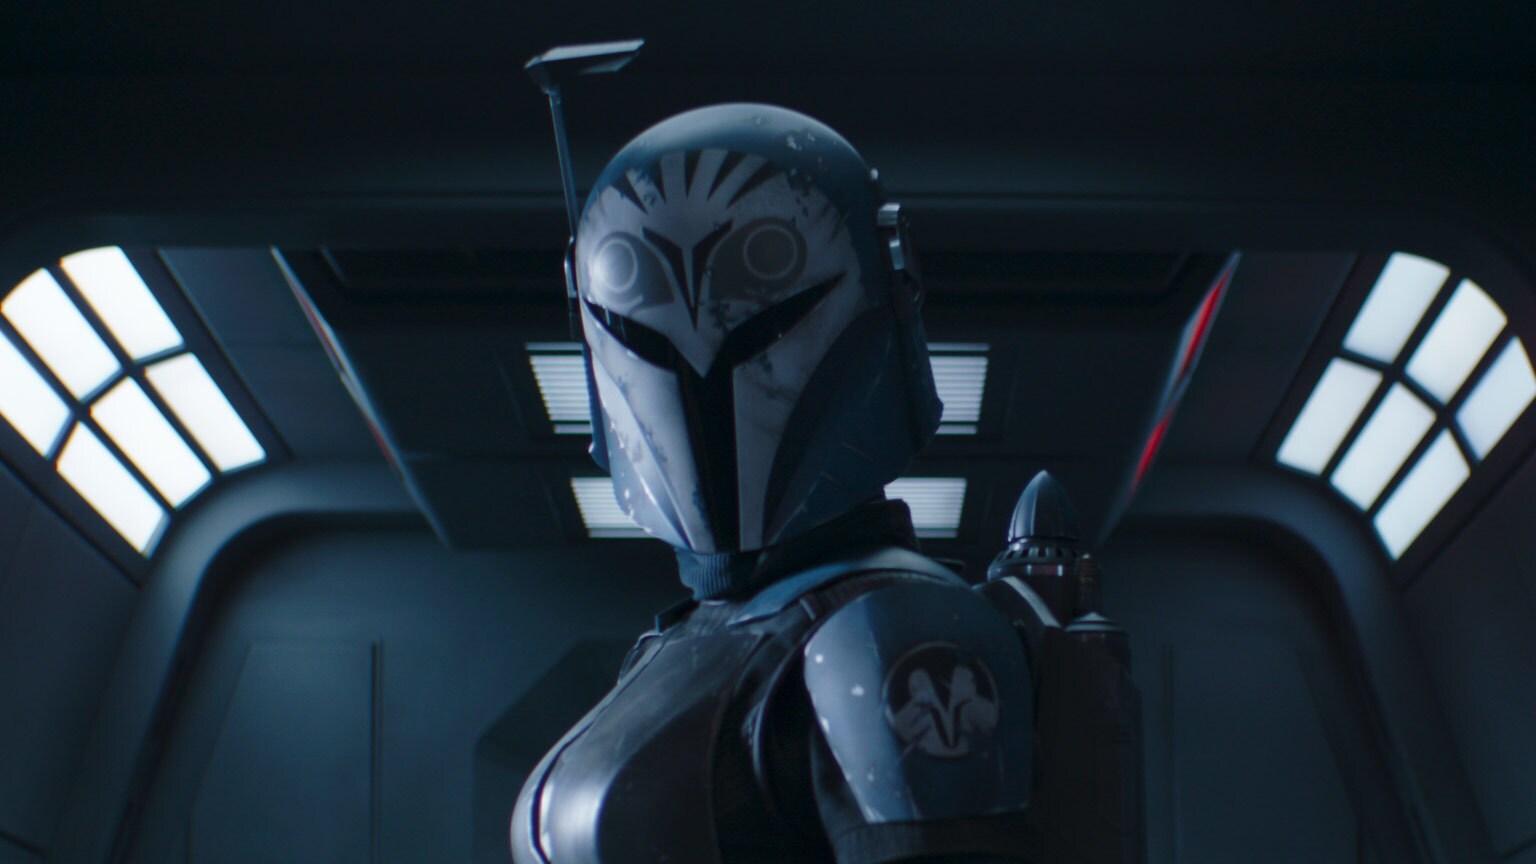 Bounty Hunting Highlights: 5 of Our Favorite Moments from The Mandalorian – “Chapter 11: The Heiress”